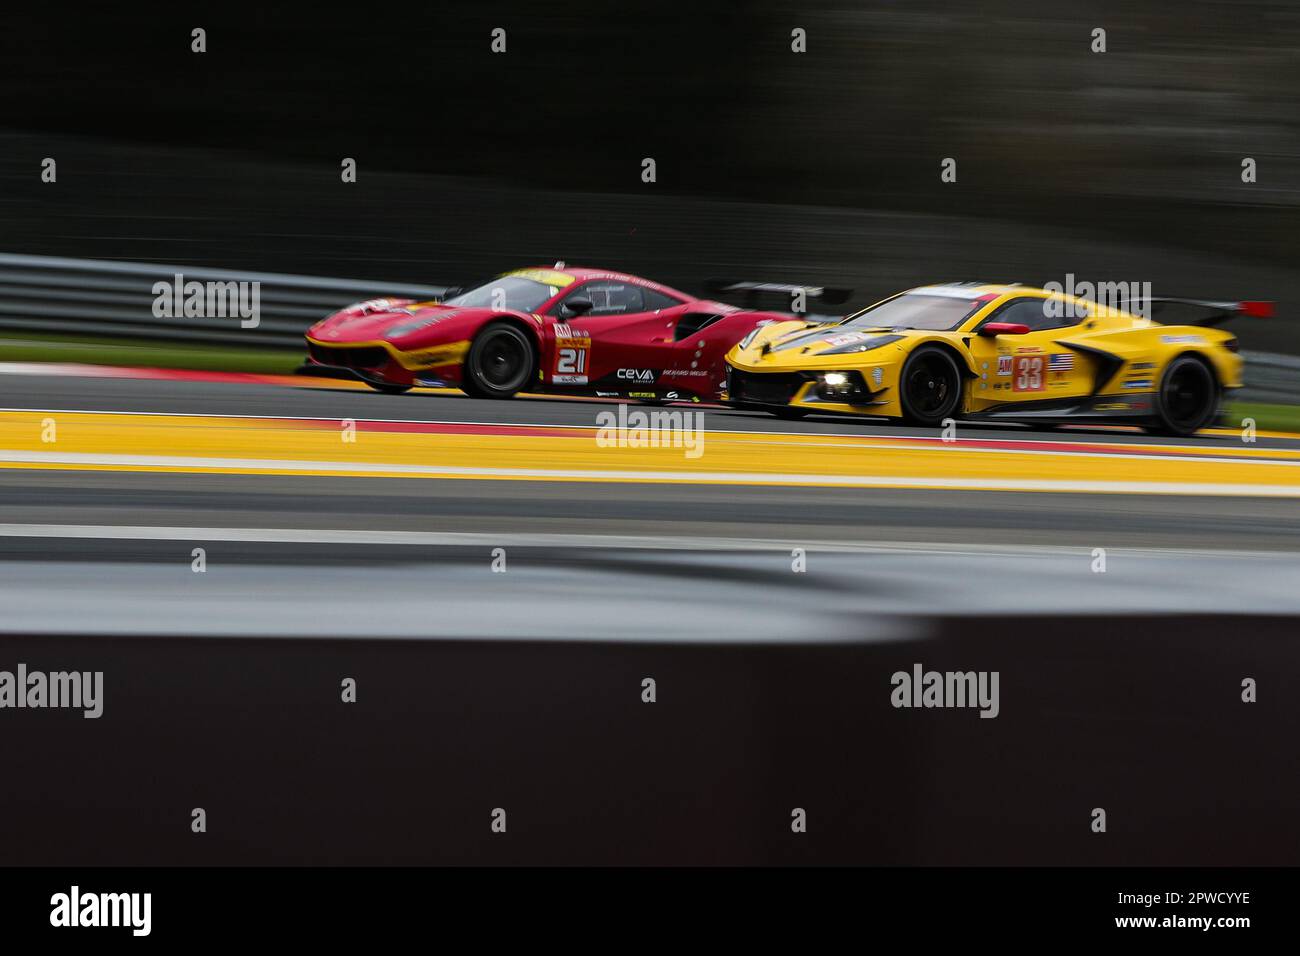 Stavelot, Belgium. 29th Apr, 2023. AF Corse's Ferrari 488 GTE Evo racing car No. 21 (L) and Corvette Racing's Chevrolet Corvette C8.R racing car No. 33 of LM GTE AM Category are seen during the race of 6 Hours Of Spa-Francorchamps, the third round of the 2023 FIA World Endurance Championship (WEC) at Circuit de Spa-Francorchamps in Stavelot, Belgium, April 29, 2023. Credit: Zheng Huansong/Xinhua/Alamy Live News Stock Photo